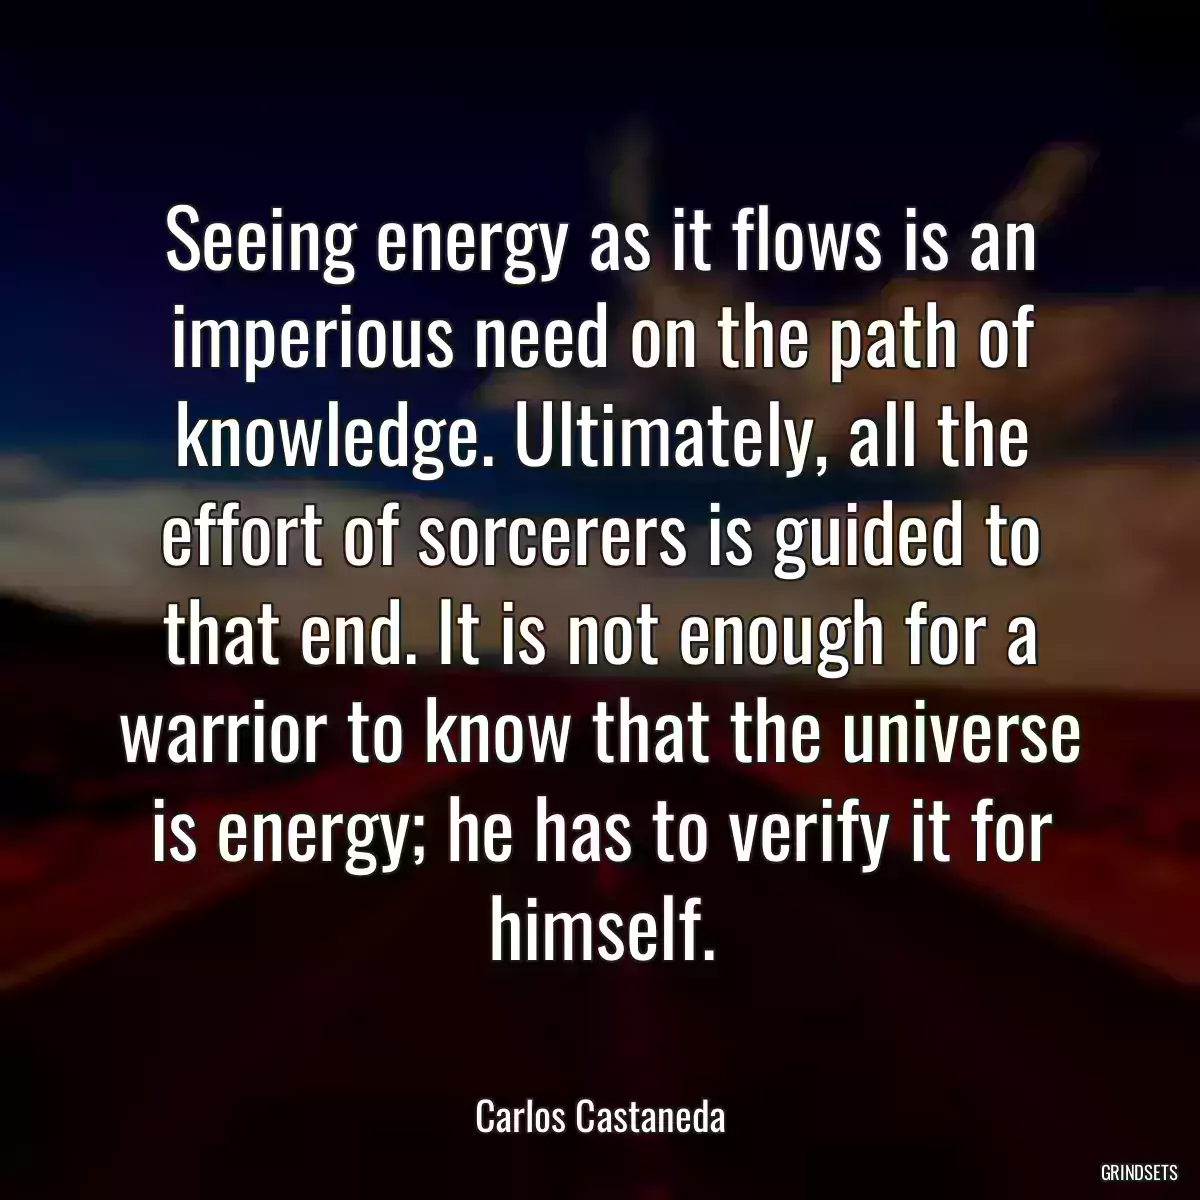 Seeing energy as it flows is an imperious need on the path of knowledge. Ultimately, all the effort of sorcerers is guided to that end. It is not enough for a warrior to know that the universe is energy; he has to verify it for himself.